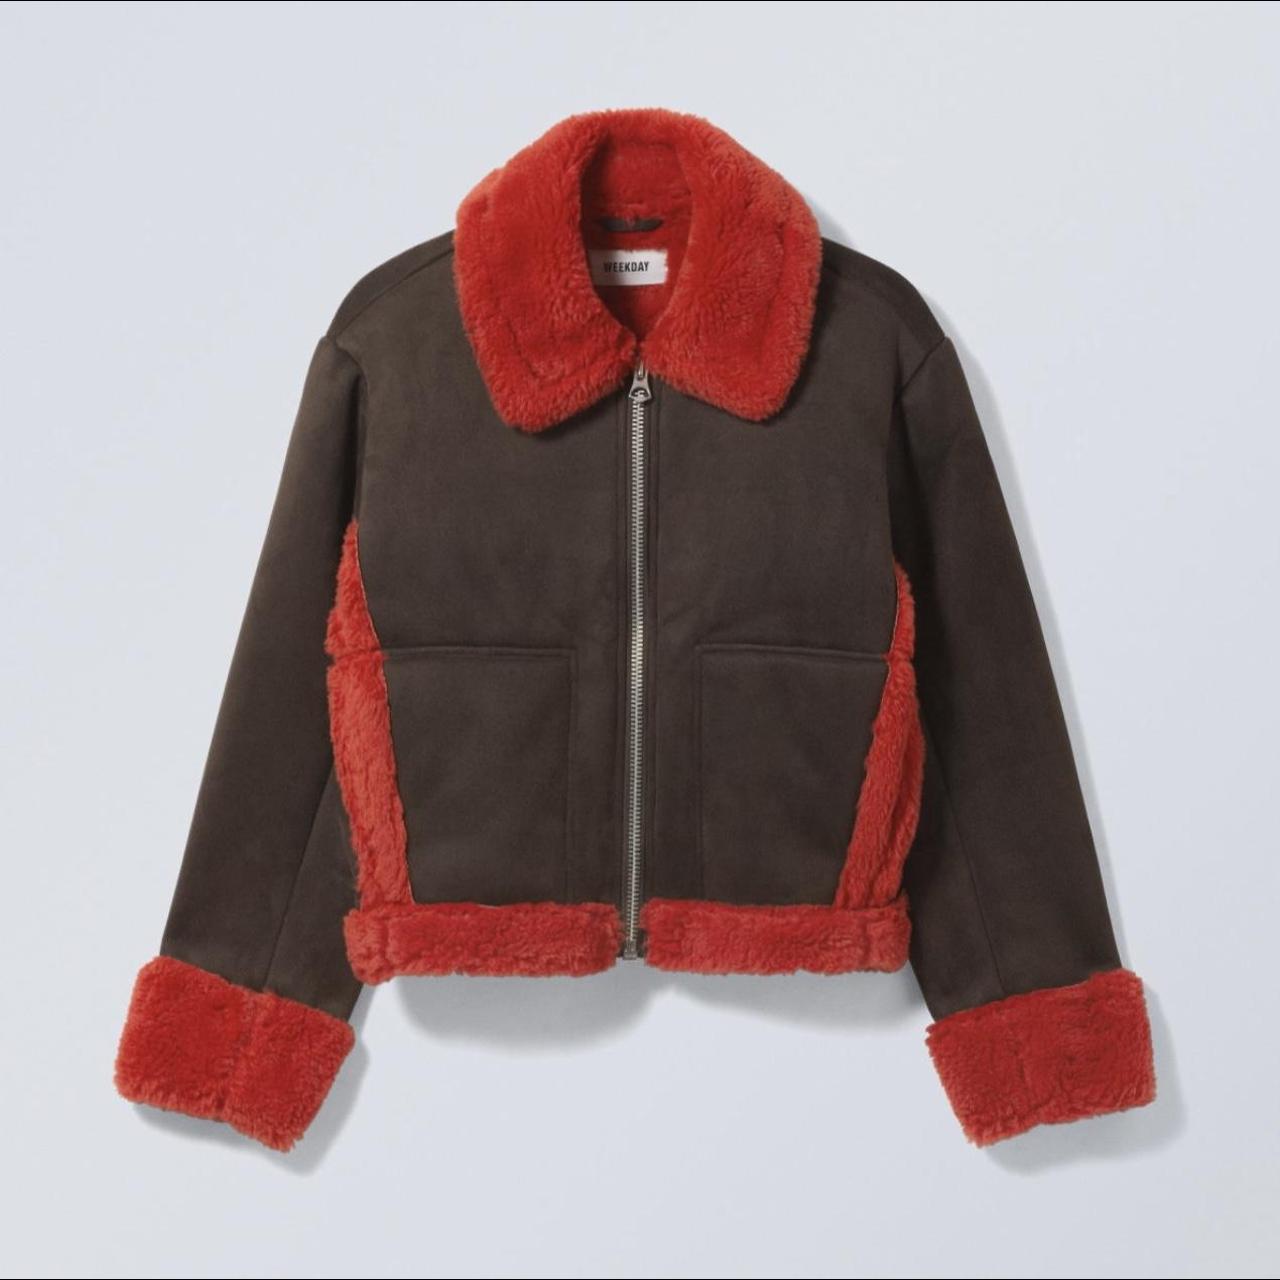 Weekday Enzo Shearling Jacket , Colour: Brown/red...